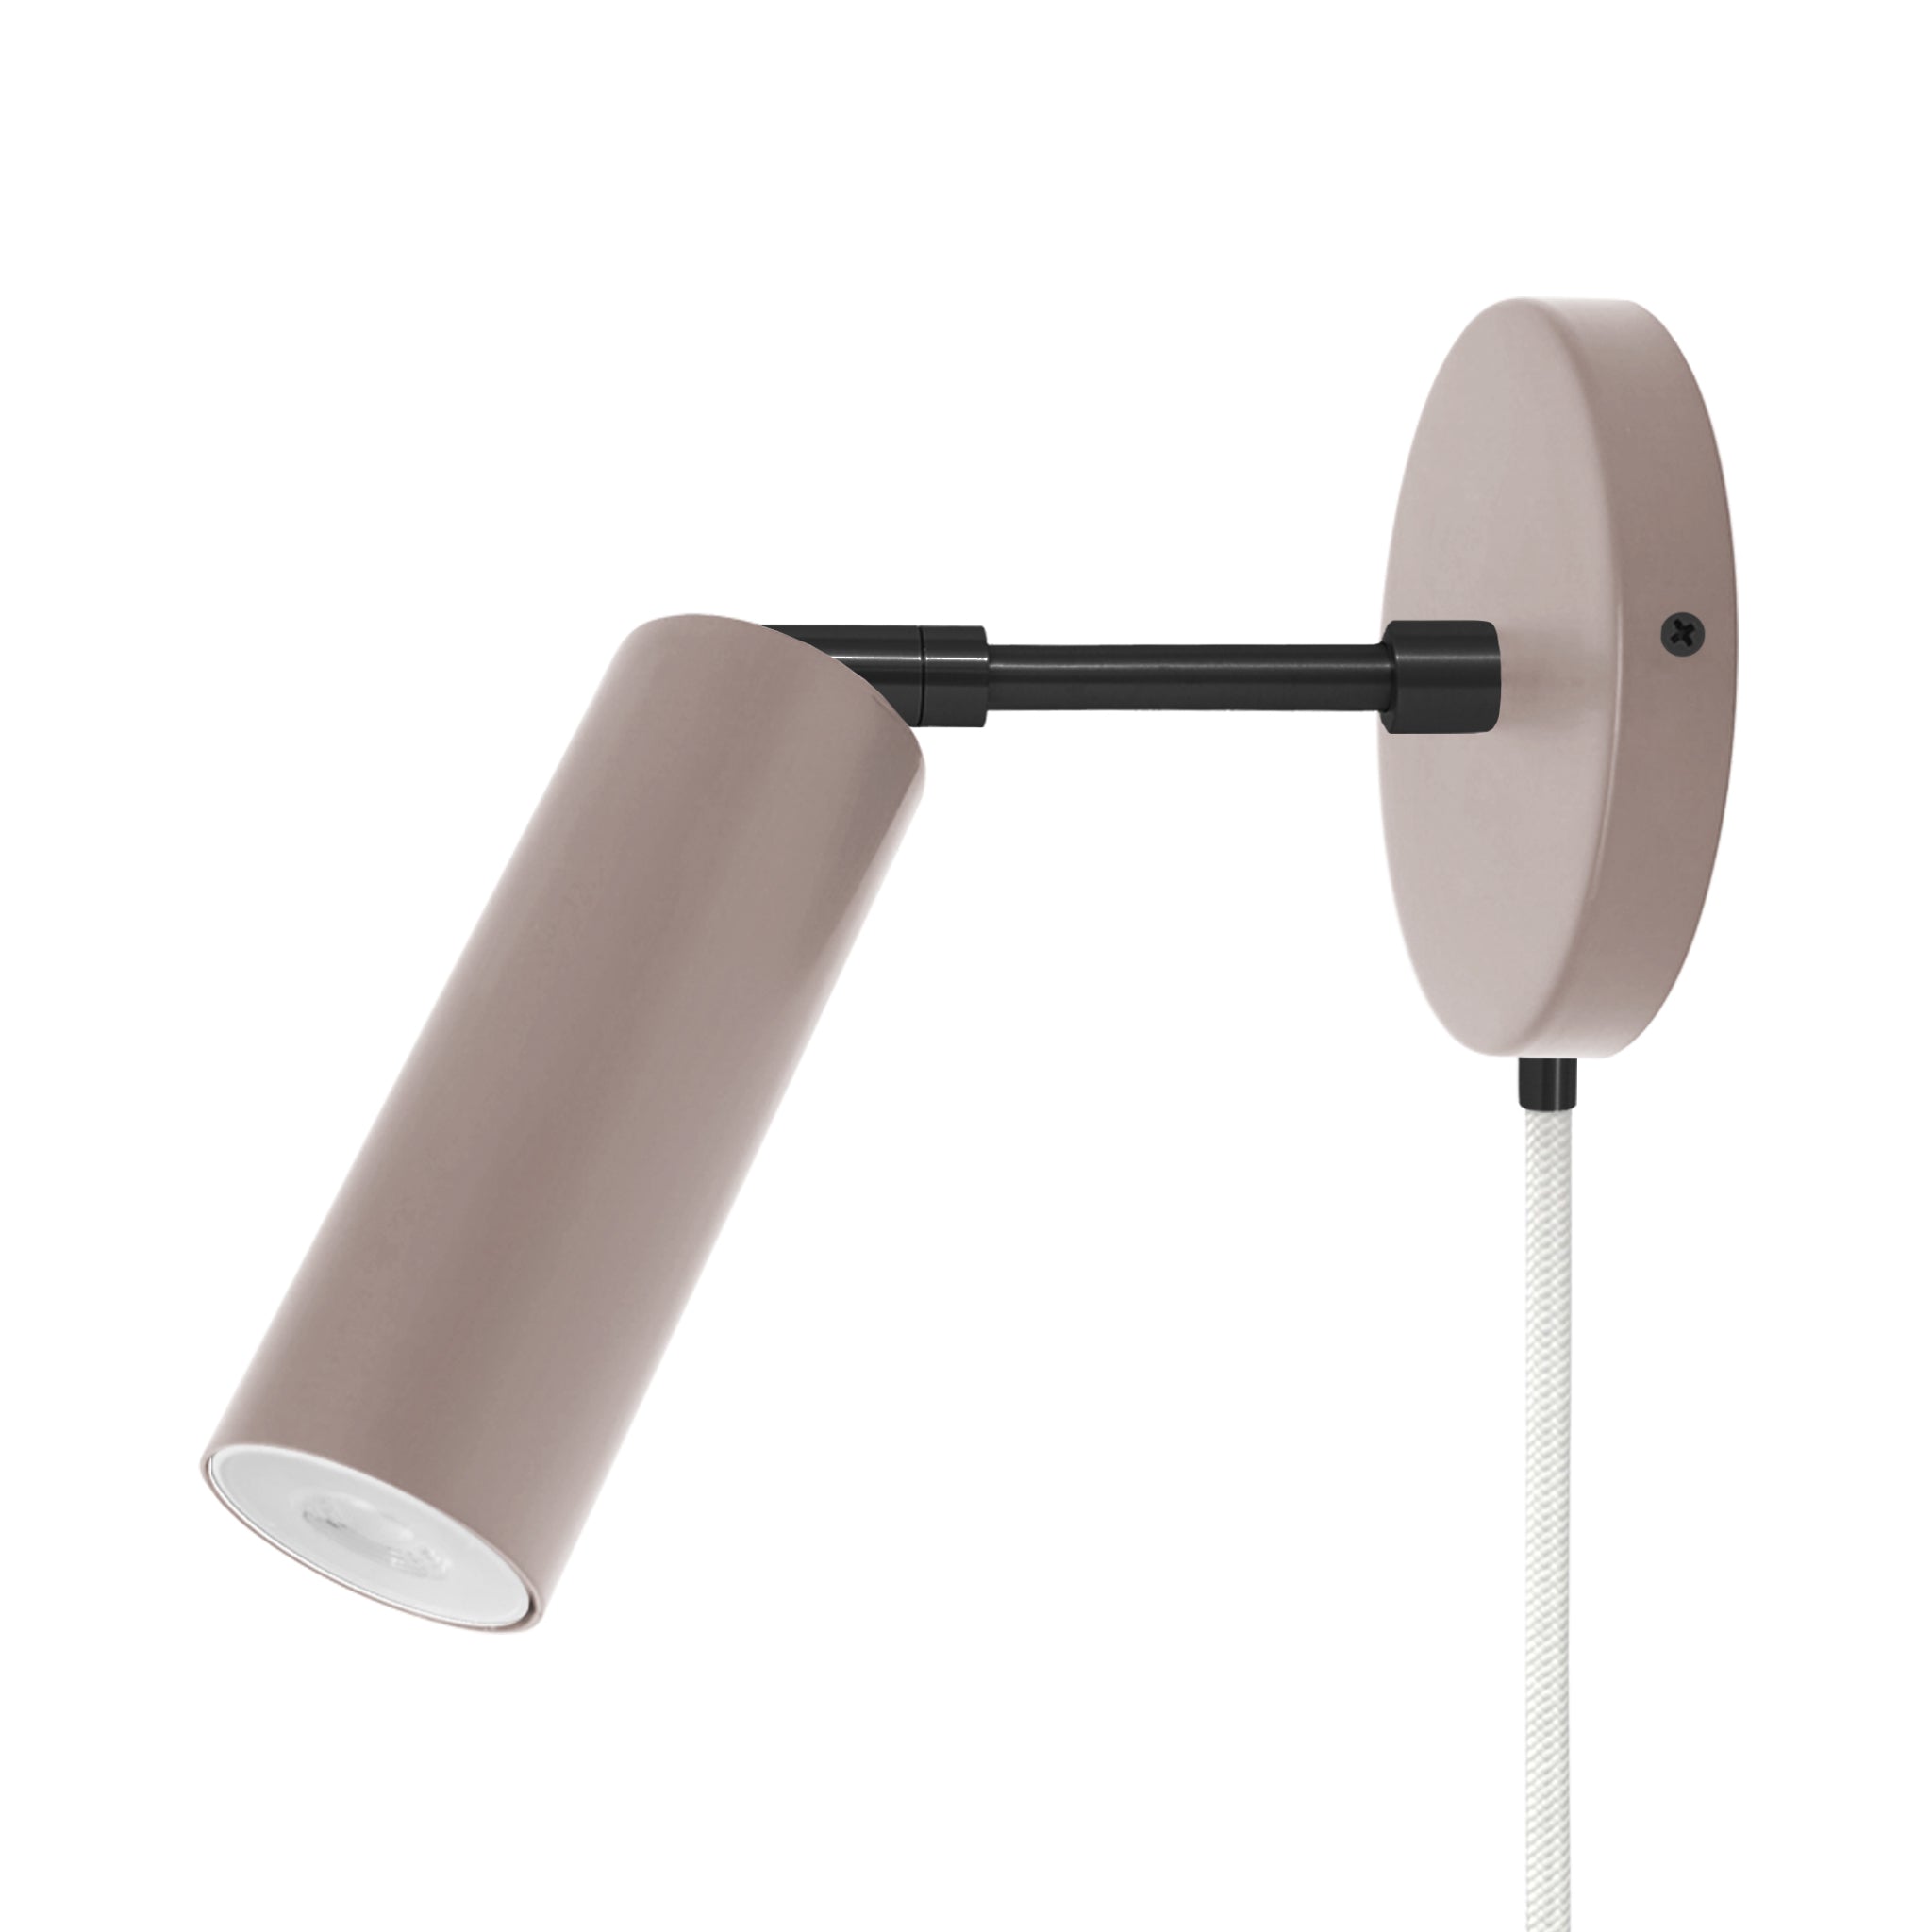 Black and barely color Reader plug-in sconce 3" arm Dutton Brown lighting